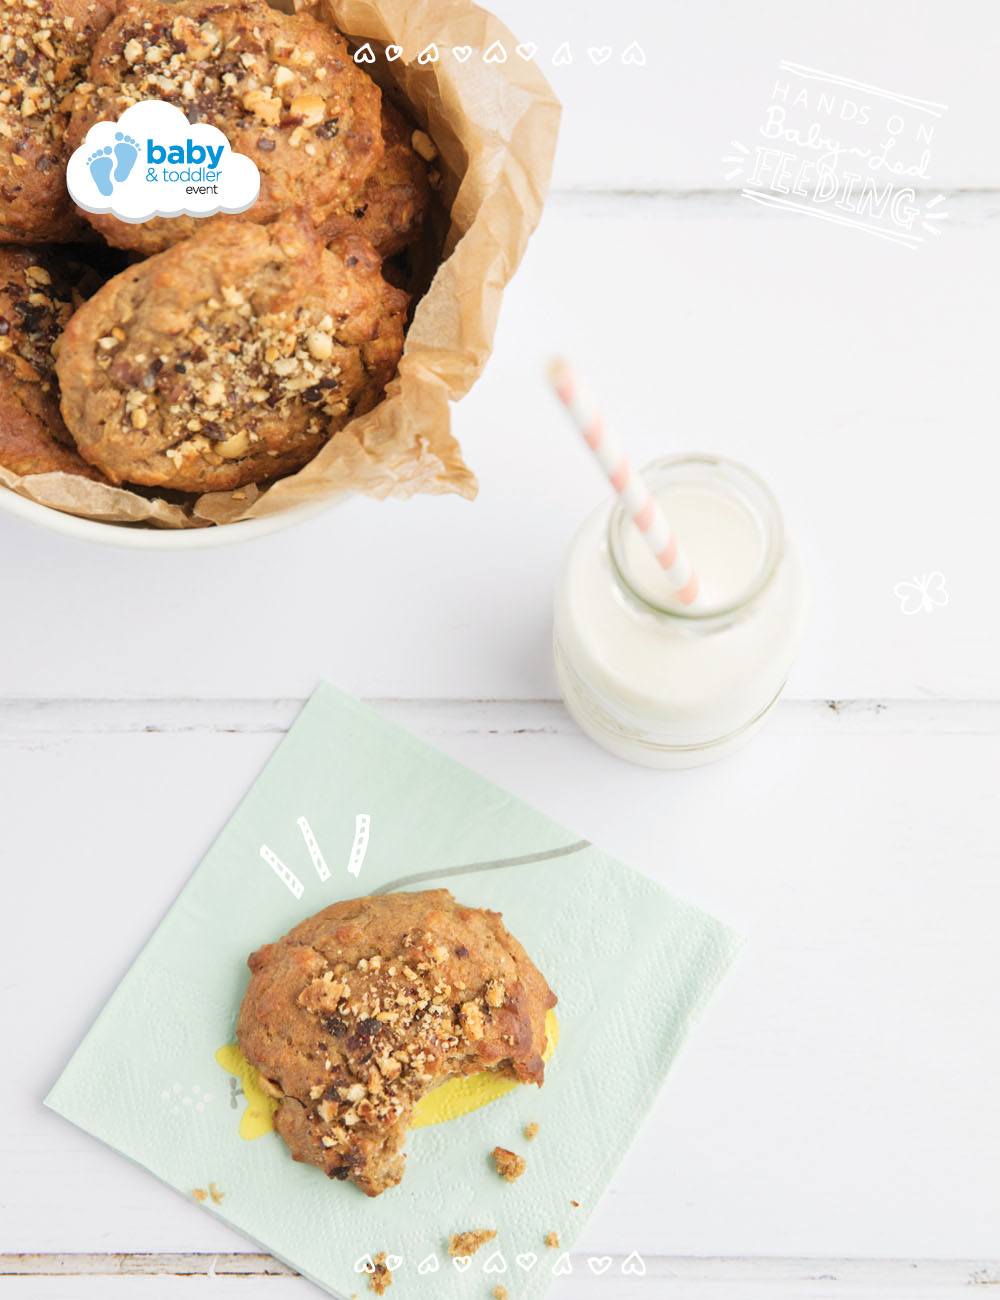 Baby-Led-Feeding-Healthy-Chickpea-Cookies-Recipe-Image-1